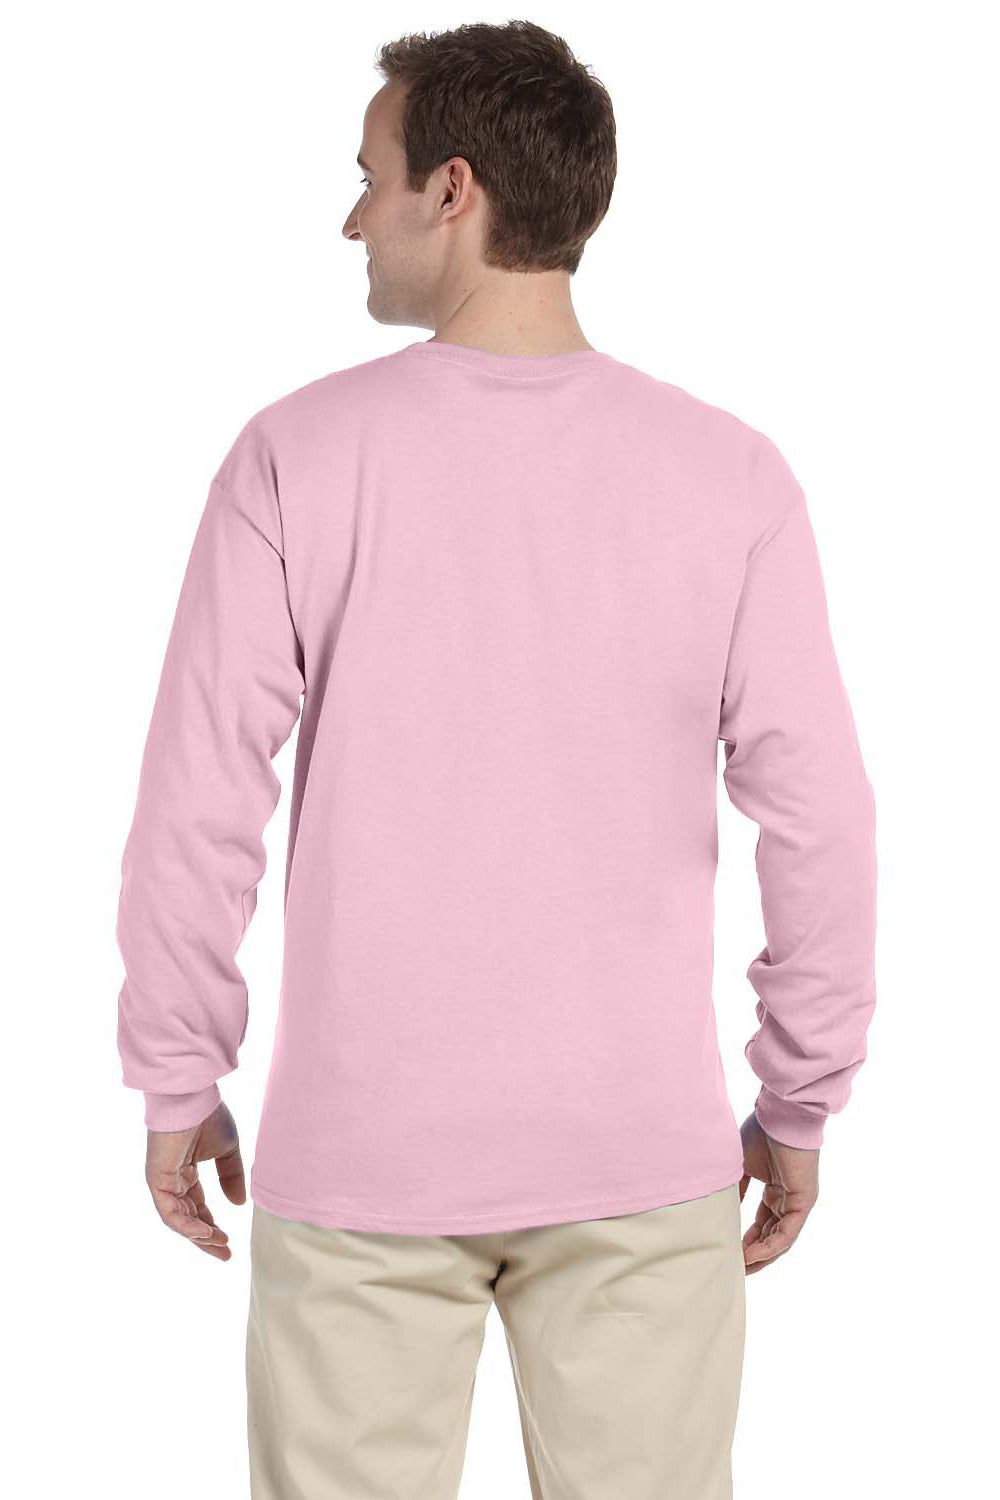 Fruit Of The Loom 4930 Mens HD Jersey Long Sleeve Crewneck T-Shirt Classic Pink Back